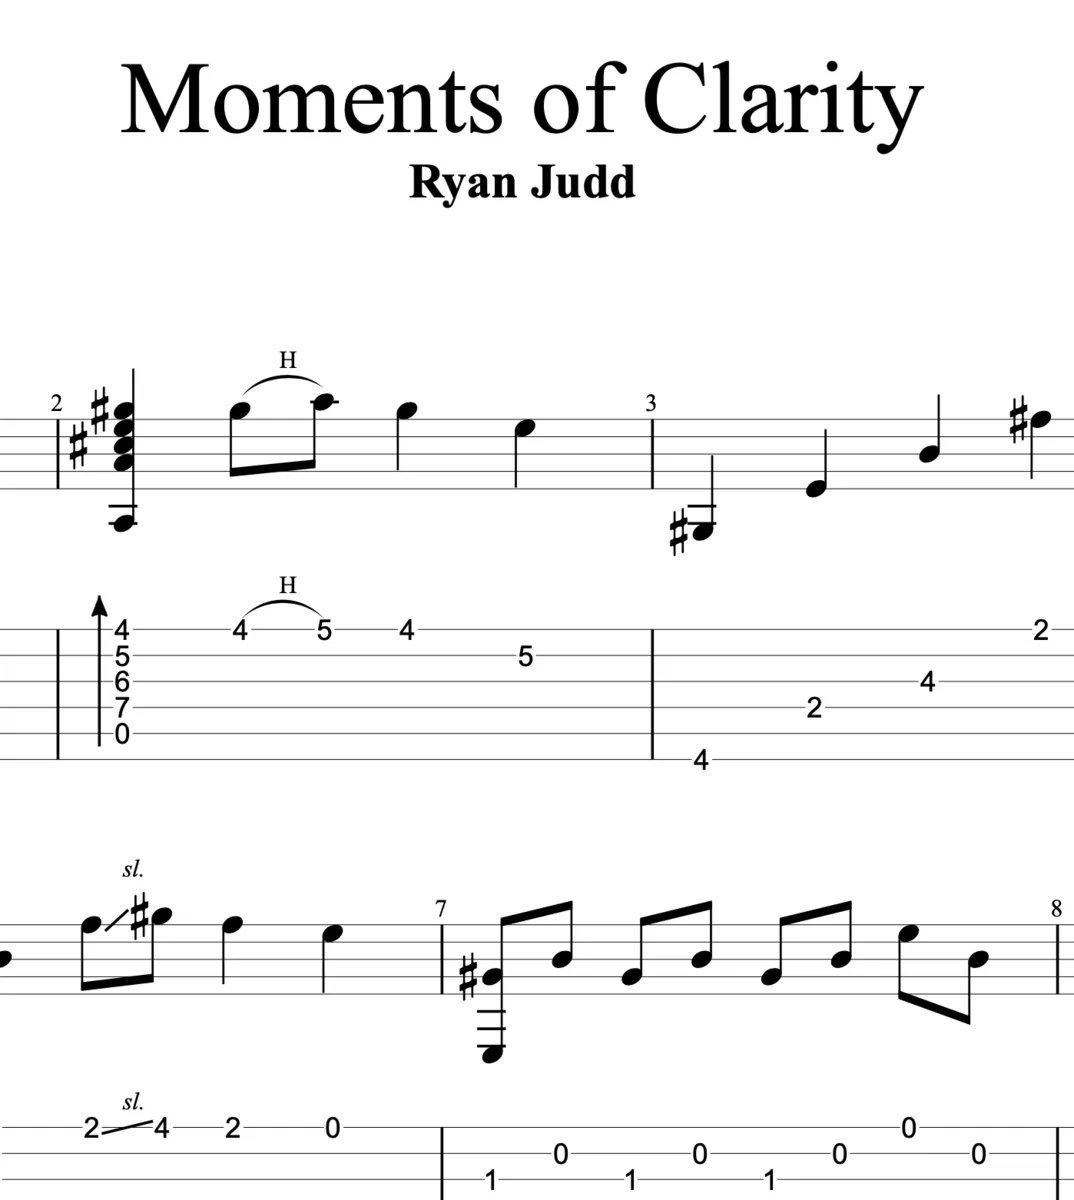 "Moments of Clarity" Guitar Tab